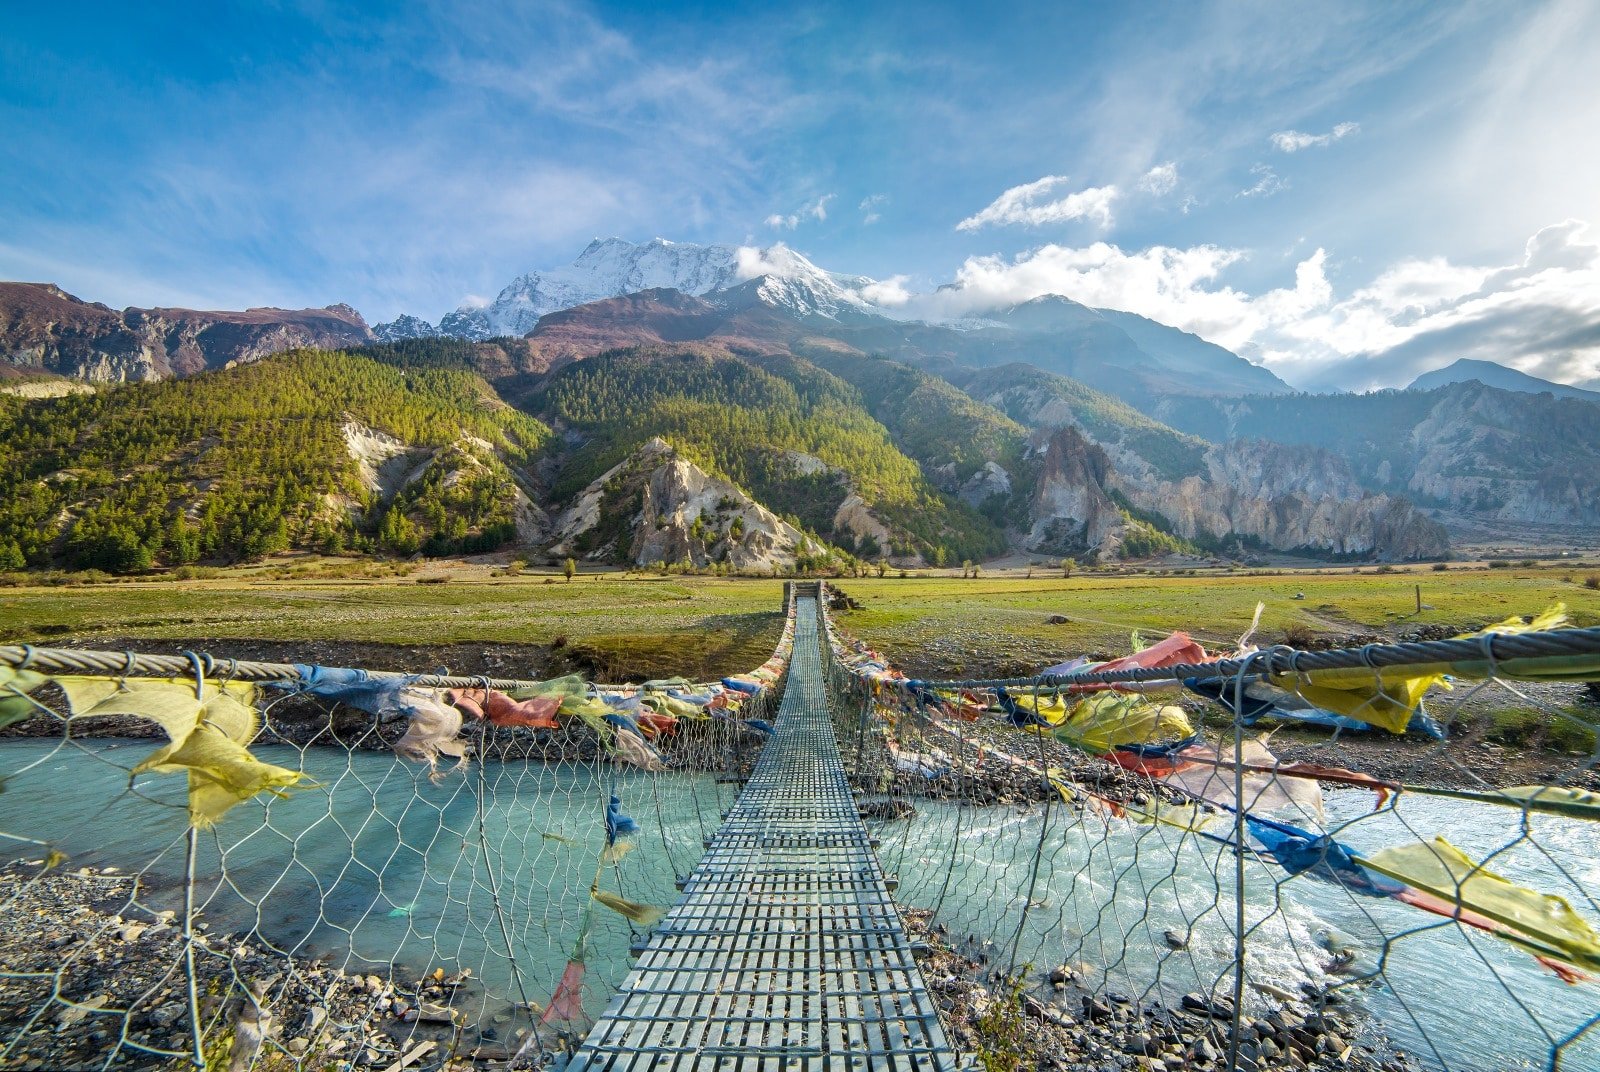 <p><span>Discover Nepal’s diverse landscapes and rich cultural history on the Annapurna Circuit. This trek has captivated adventurers for decades. Spanning approximately 100 to 145 miles, the journey varies based on chosen routes and side excursions. As you traverse this trail, you’ll experience a dramatic shift in scenery, from lush rice paddies and subtropical forests to arid high-altitude plateaus.</span></p> <p><span>The trek is a window into the soul of Nepal, offering glimpses of rural life in remote villages and the opportunity to interact with the warm and hospitable Gurung and Thakali communities. The trek’s high point, literally and figuratively, is crossing the Thorong La Pass at 17,769 feet, a challenging yet exhilarating endeavor.</span></p> <p><span>Each step on this trail brings you closer to the towering Himalayas and deeper into a land rich in history and tradition. The Annapurna Circuit is not just a trek; it explores the human spirit amidst some of the most awe-inspiring landscapes on earth.</span></p> <p><b>Insider’s Tip: </b><span>Acclimatize properly to avoid altitude sickness.</span></p> <p><b>When To Travel: </b><span>September to November and March to May offer the best weather.</span></p> <p><b>How To Get There: </b><span>The trek usually starts in Besisahar or Bhulbhule, which is accessible by bus from Kathmandu or Pokhara.</span></p>